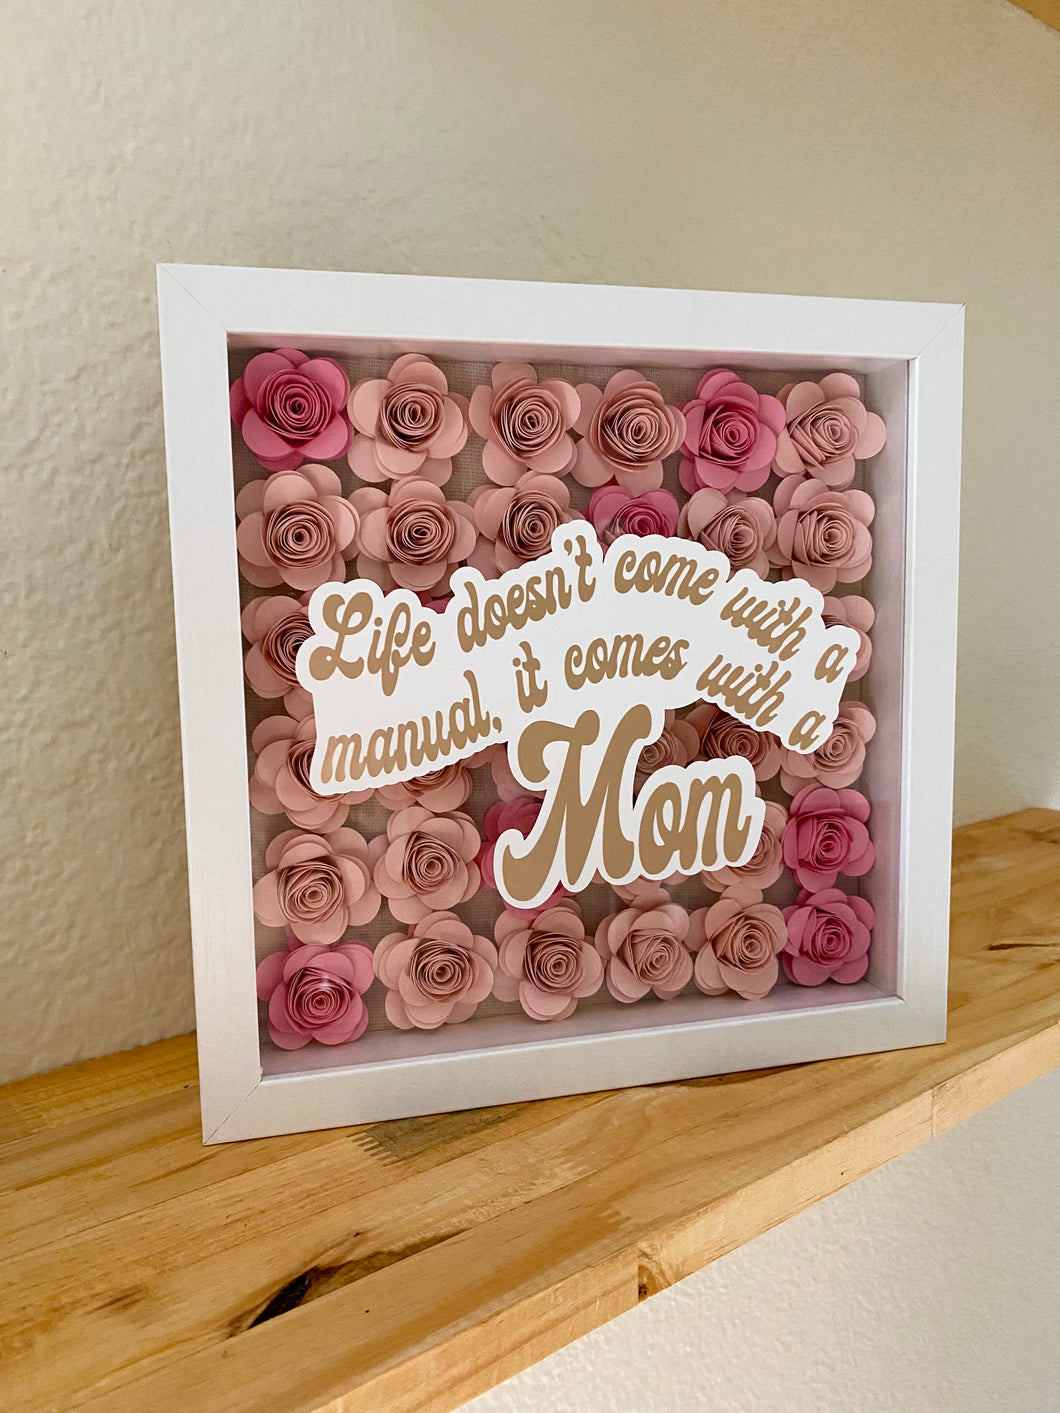 Life Doesn't Come With A Manual It Comes With A Mom Paper Flower Shadow Box